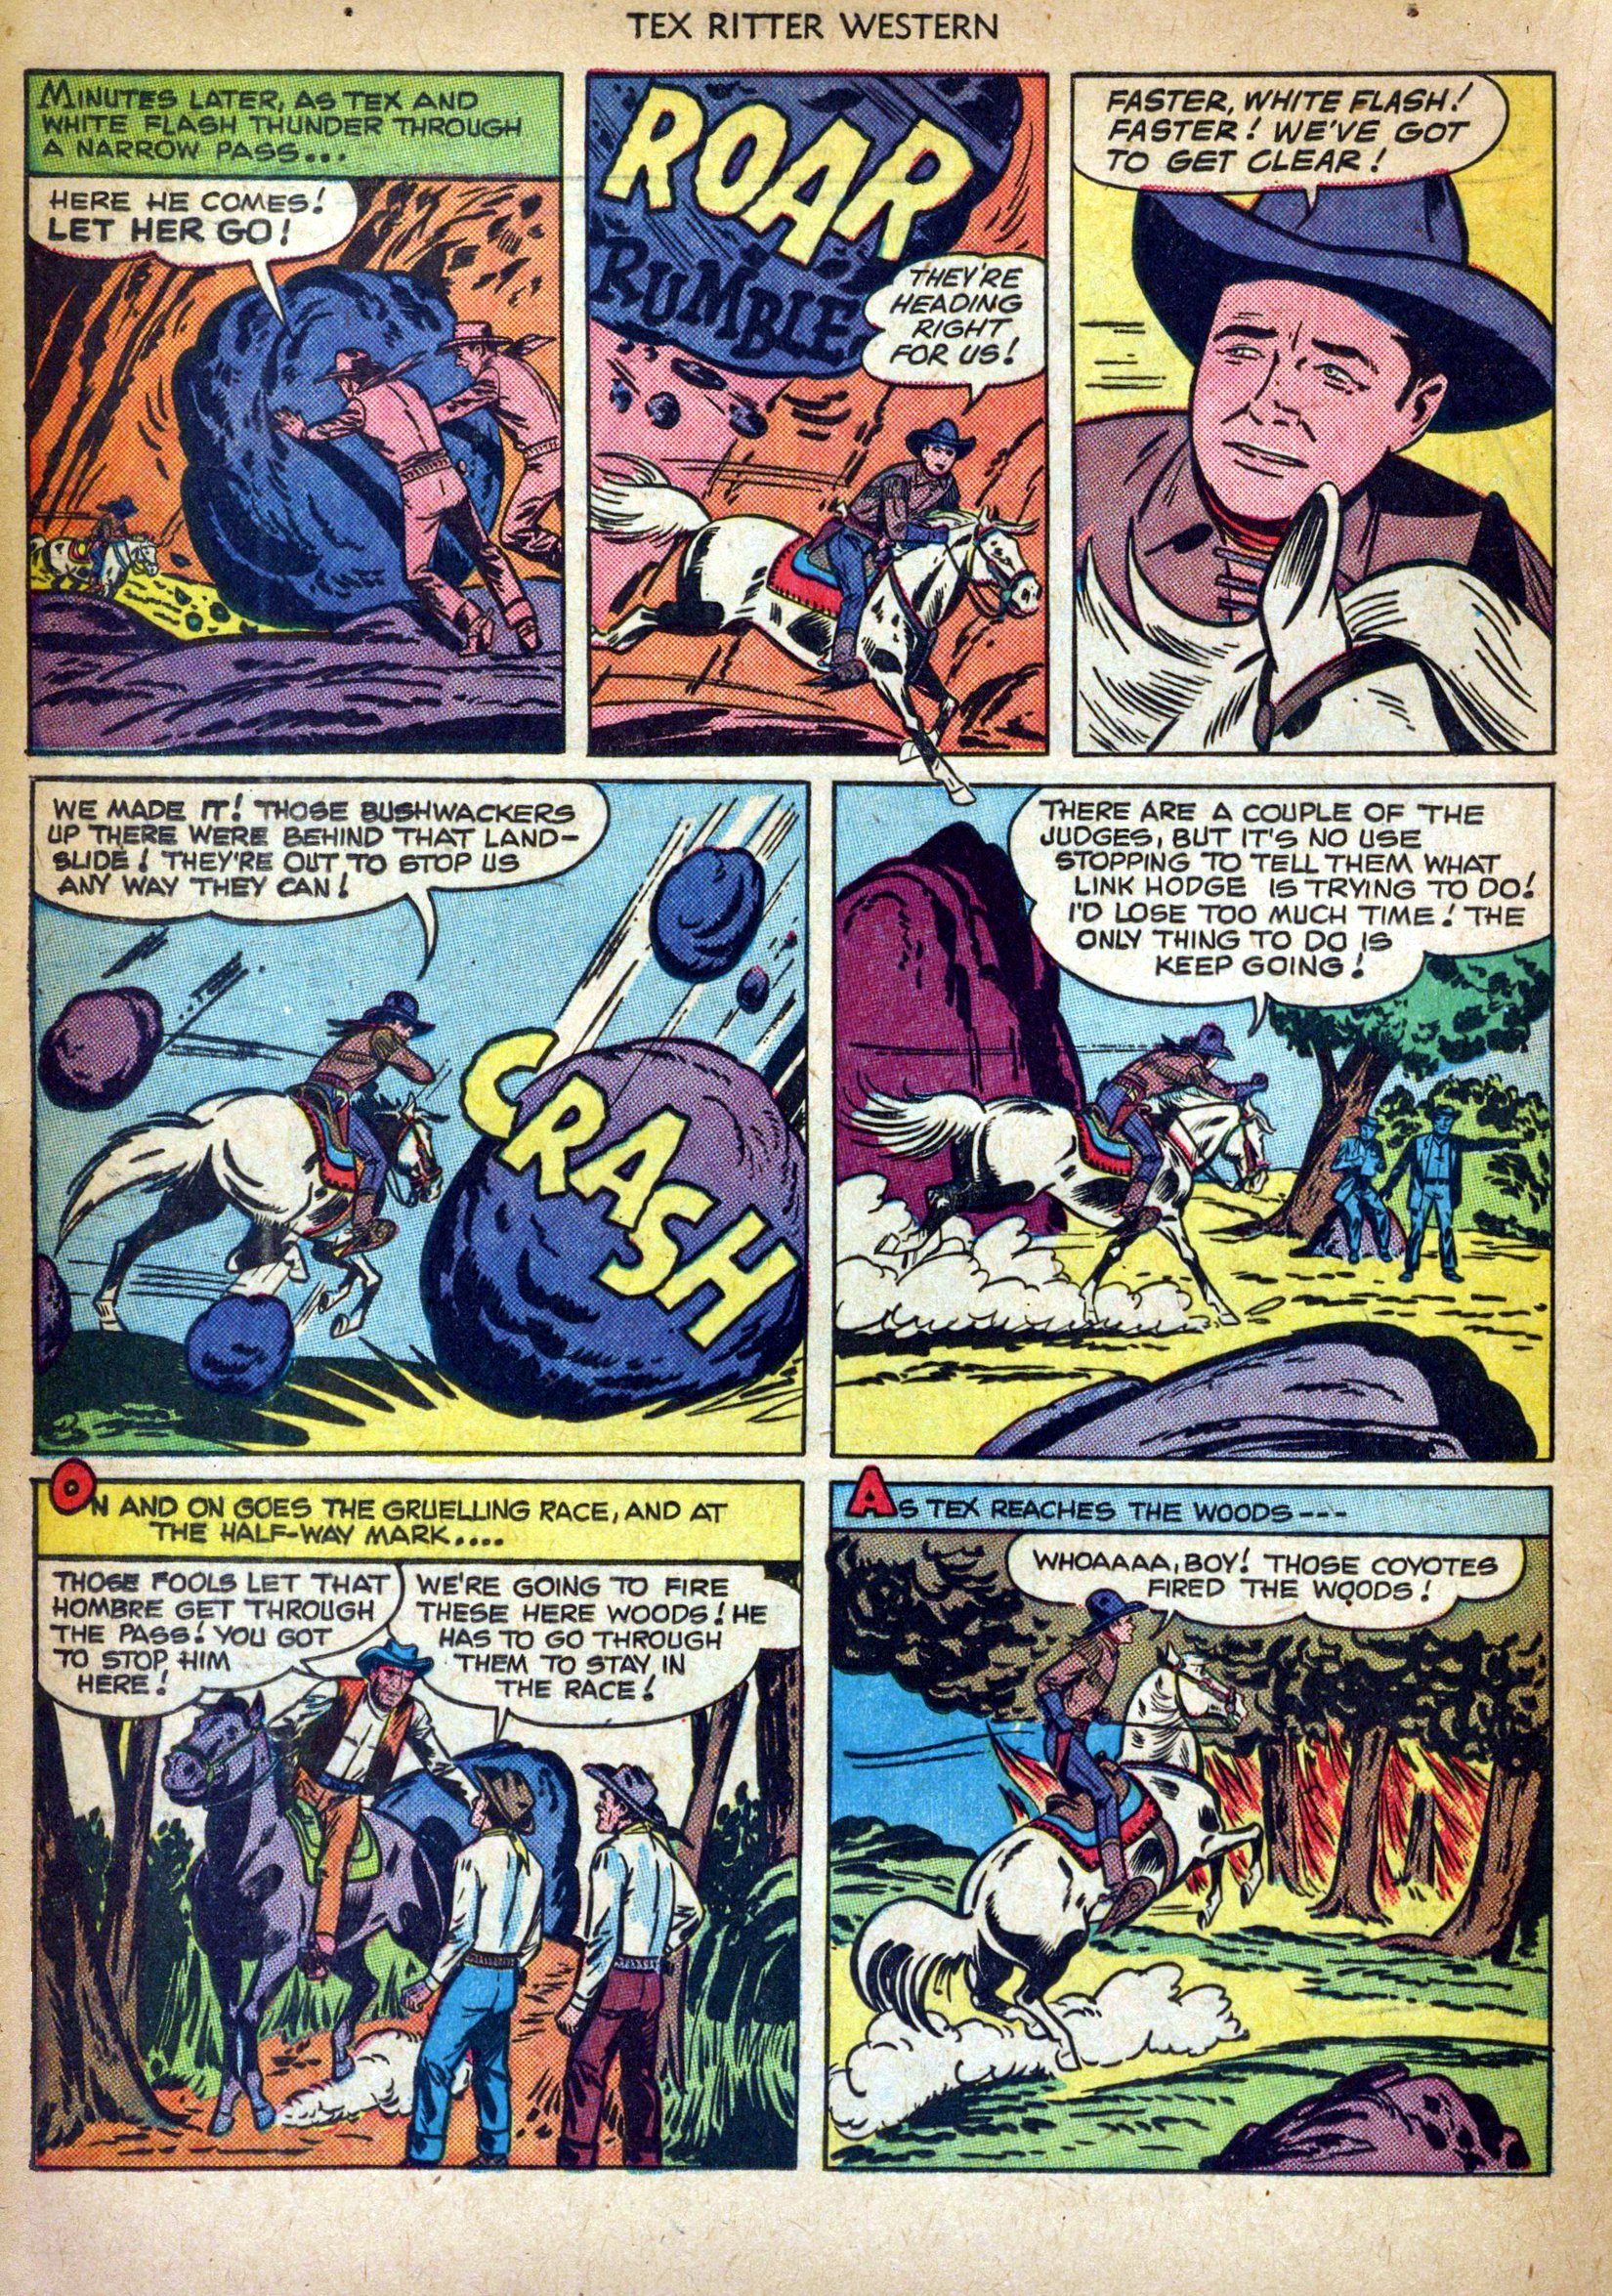 Read online Tex Ritter Western comic -  Issue #4 - 20